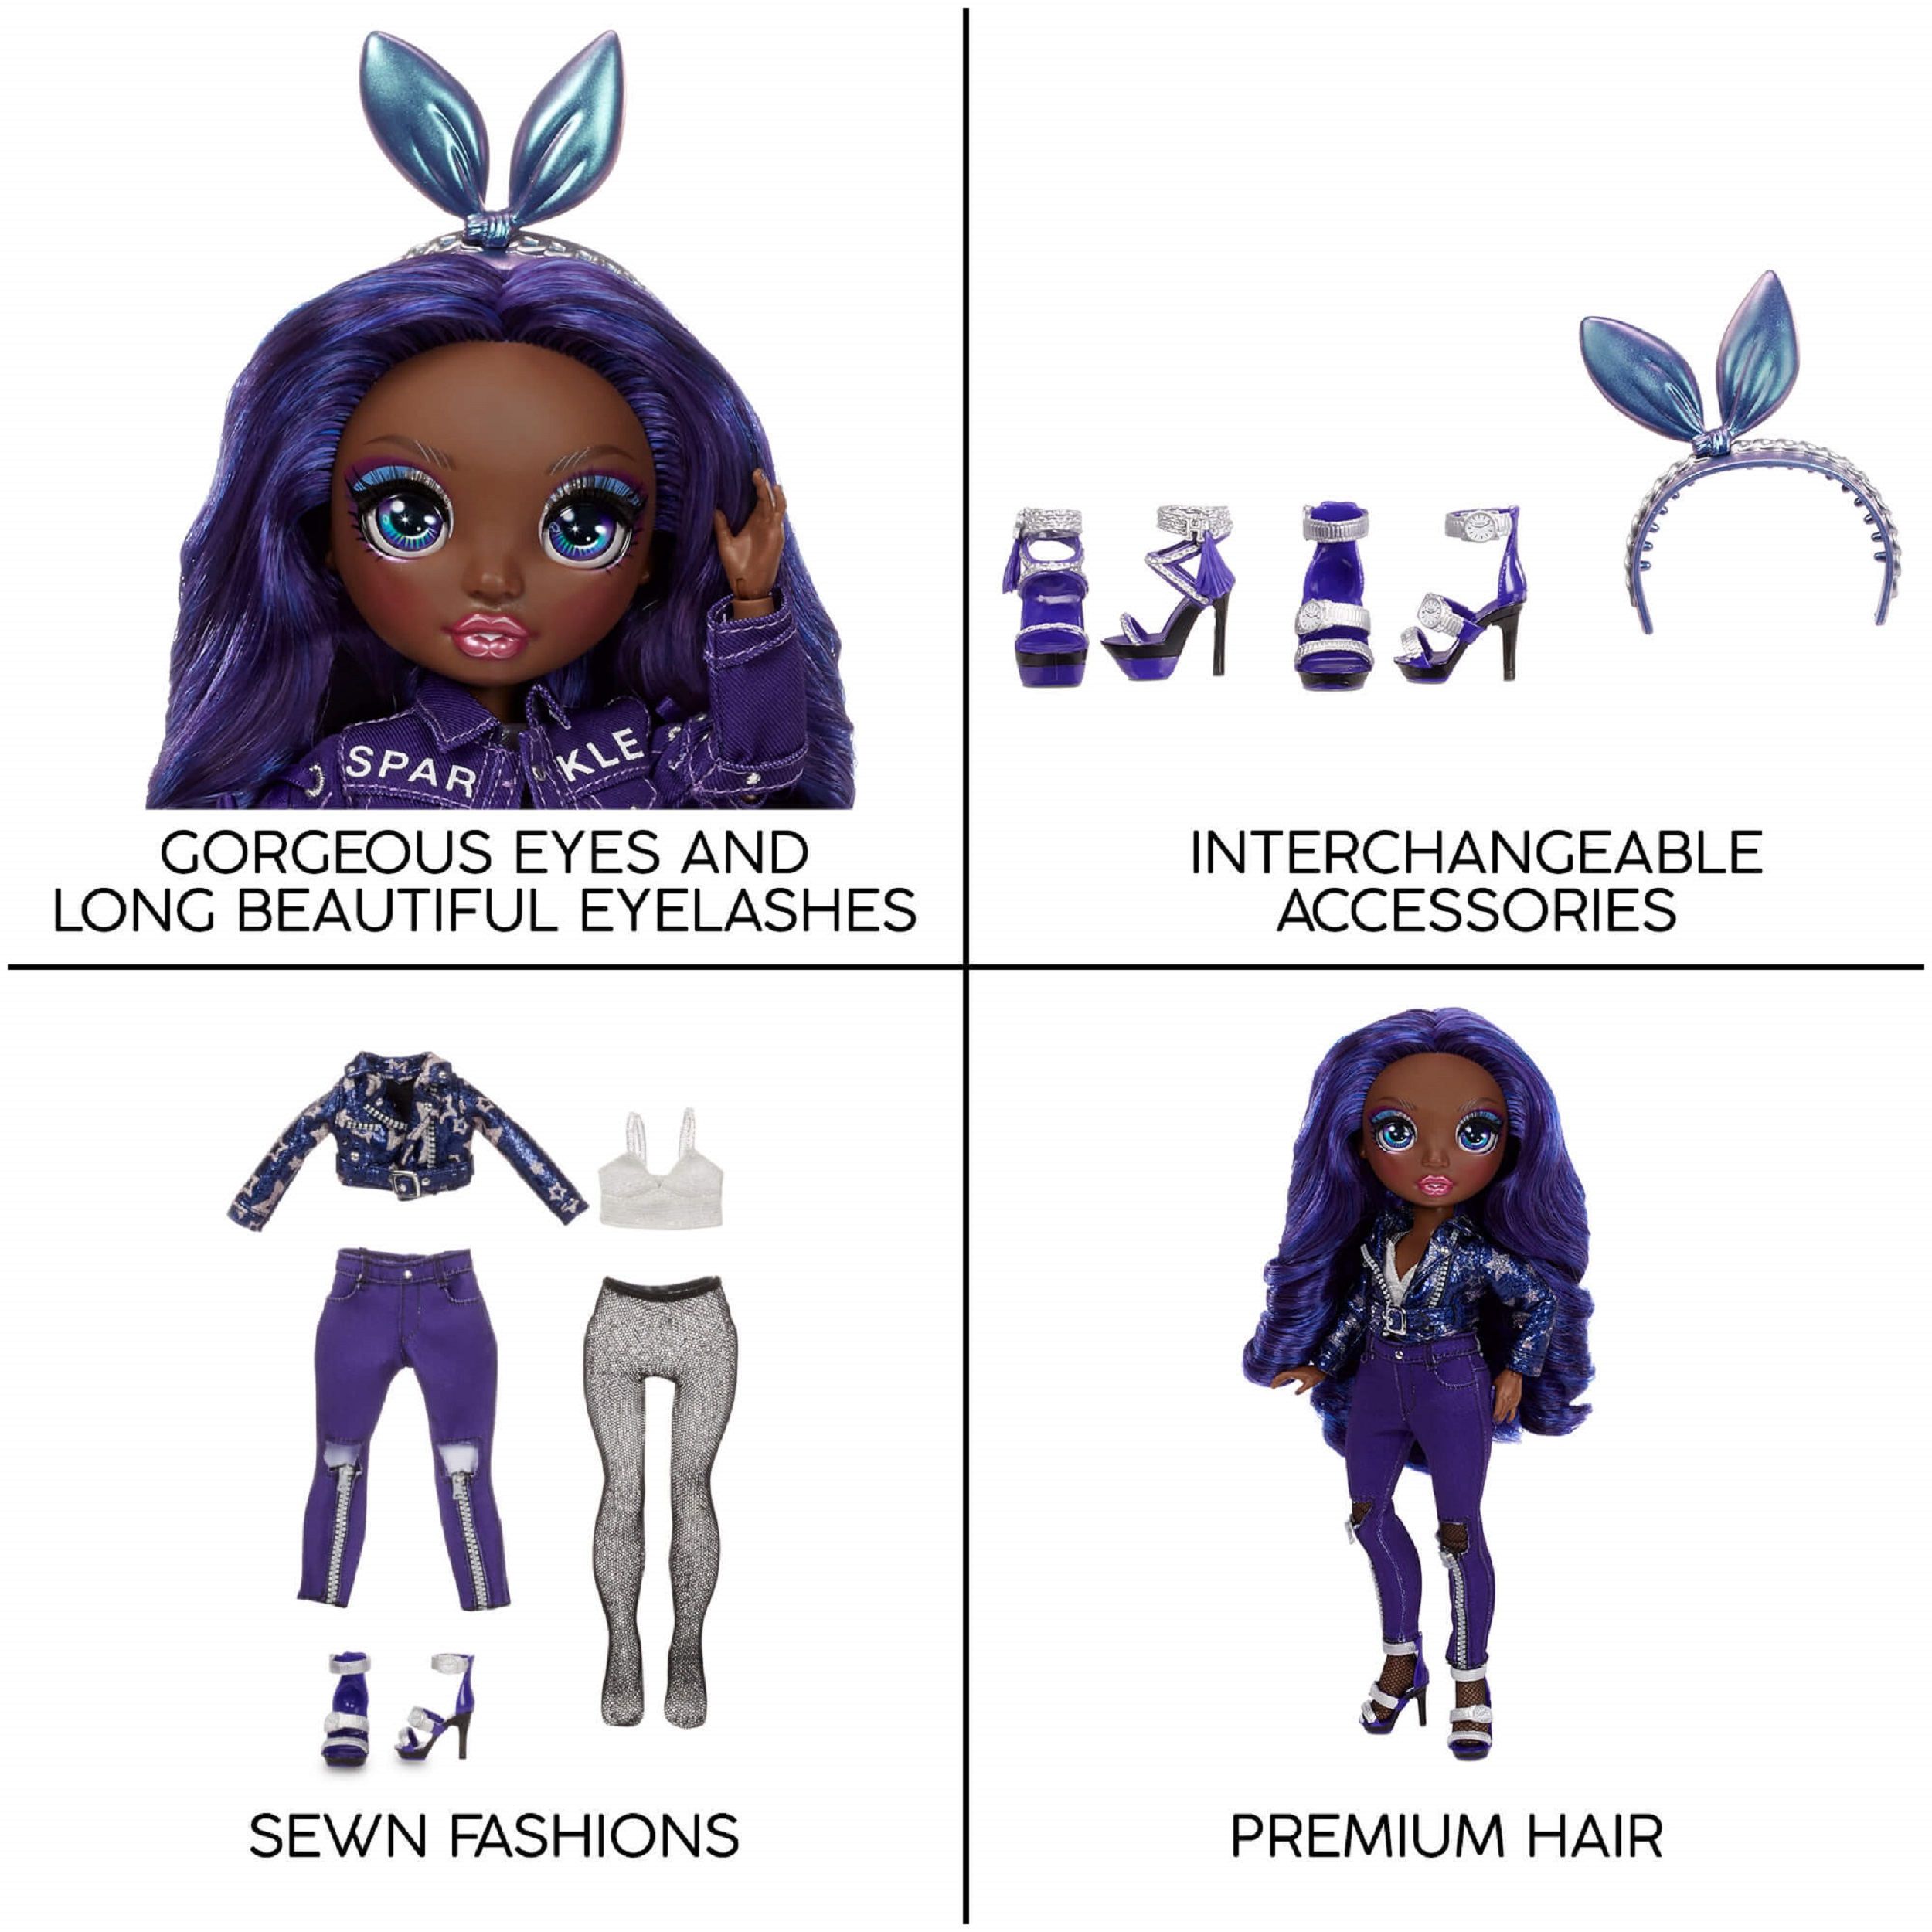 Rainbow High Krystal Bailey – Indigo (Dark Blue Purple) Fashion Doll With 2 Complete Mix & Match Outfits And Accessories, Toys for Kids 6-12 Years Old - image 7 of 8